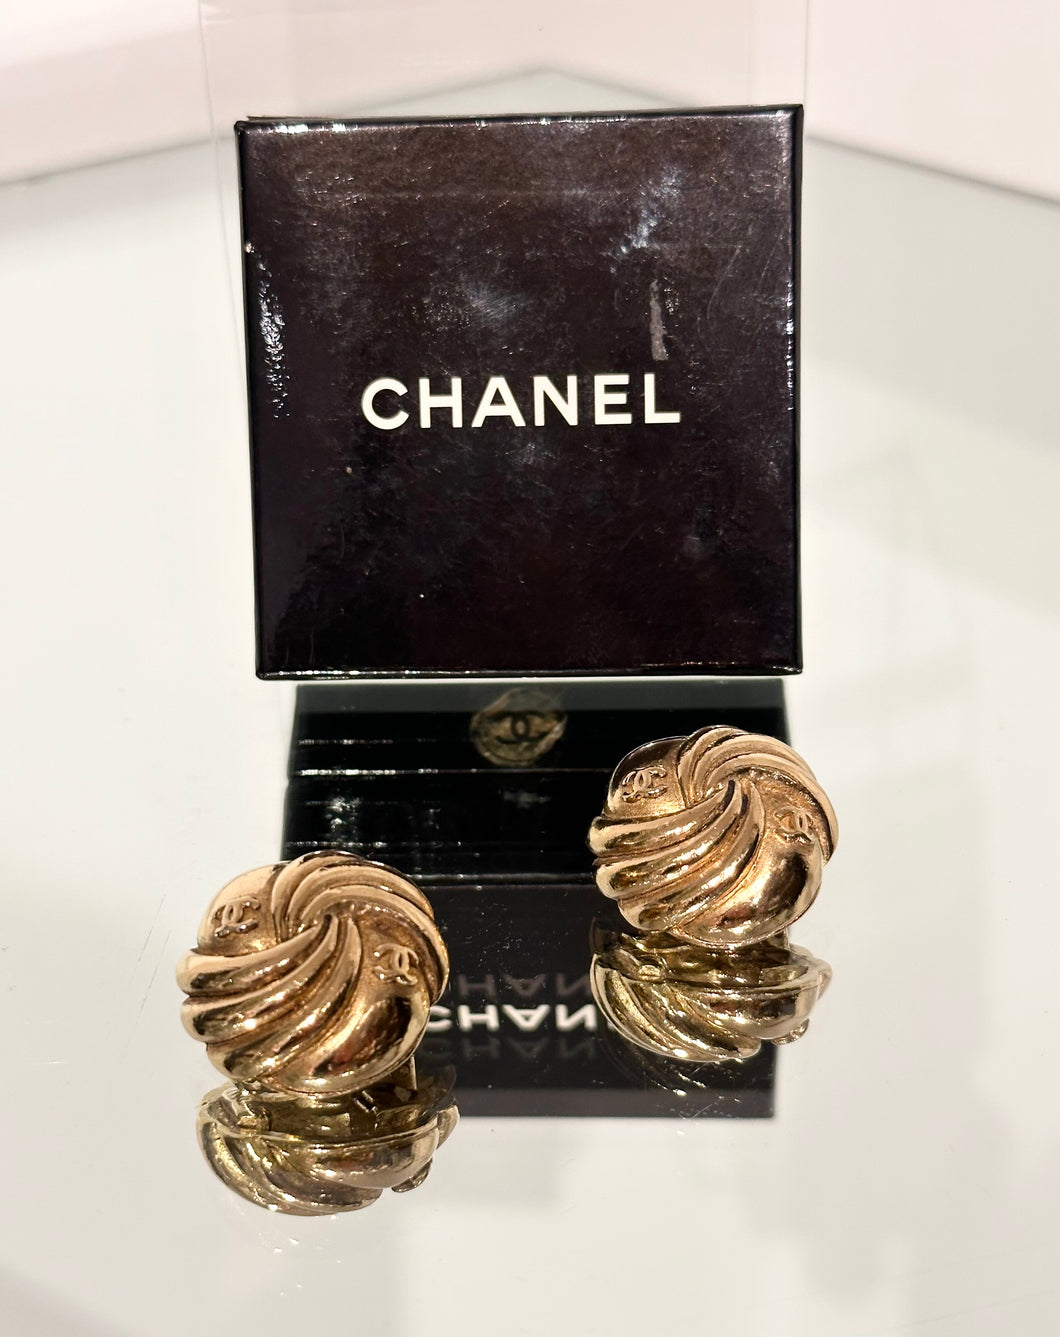 CHANEL Vintage Gold Tone CC Swirled Button Clip-on Earrings